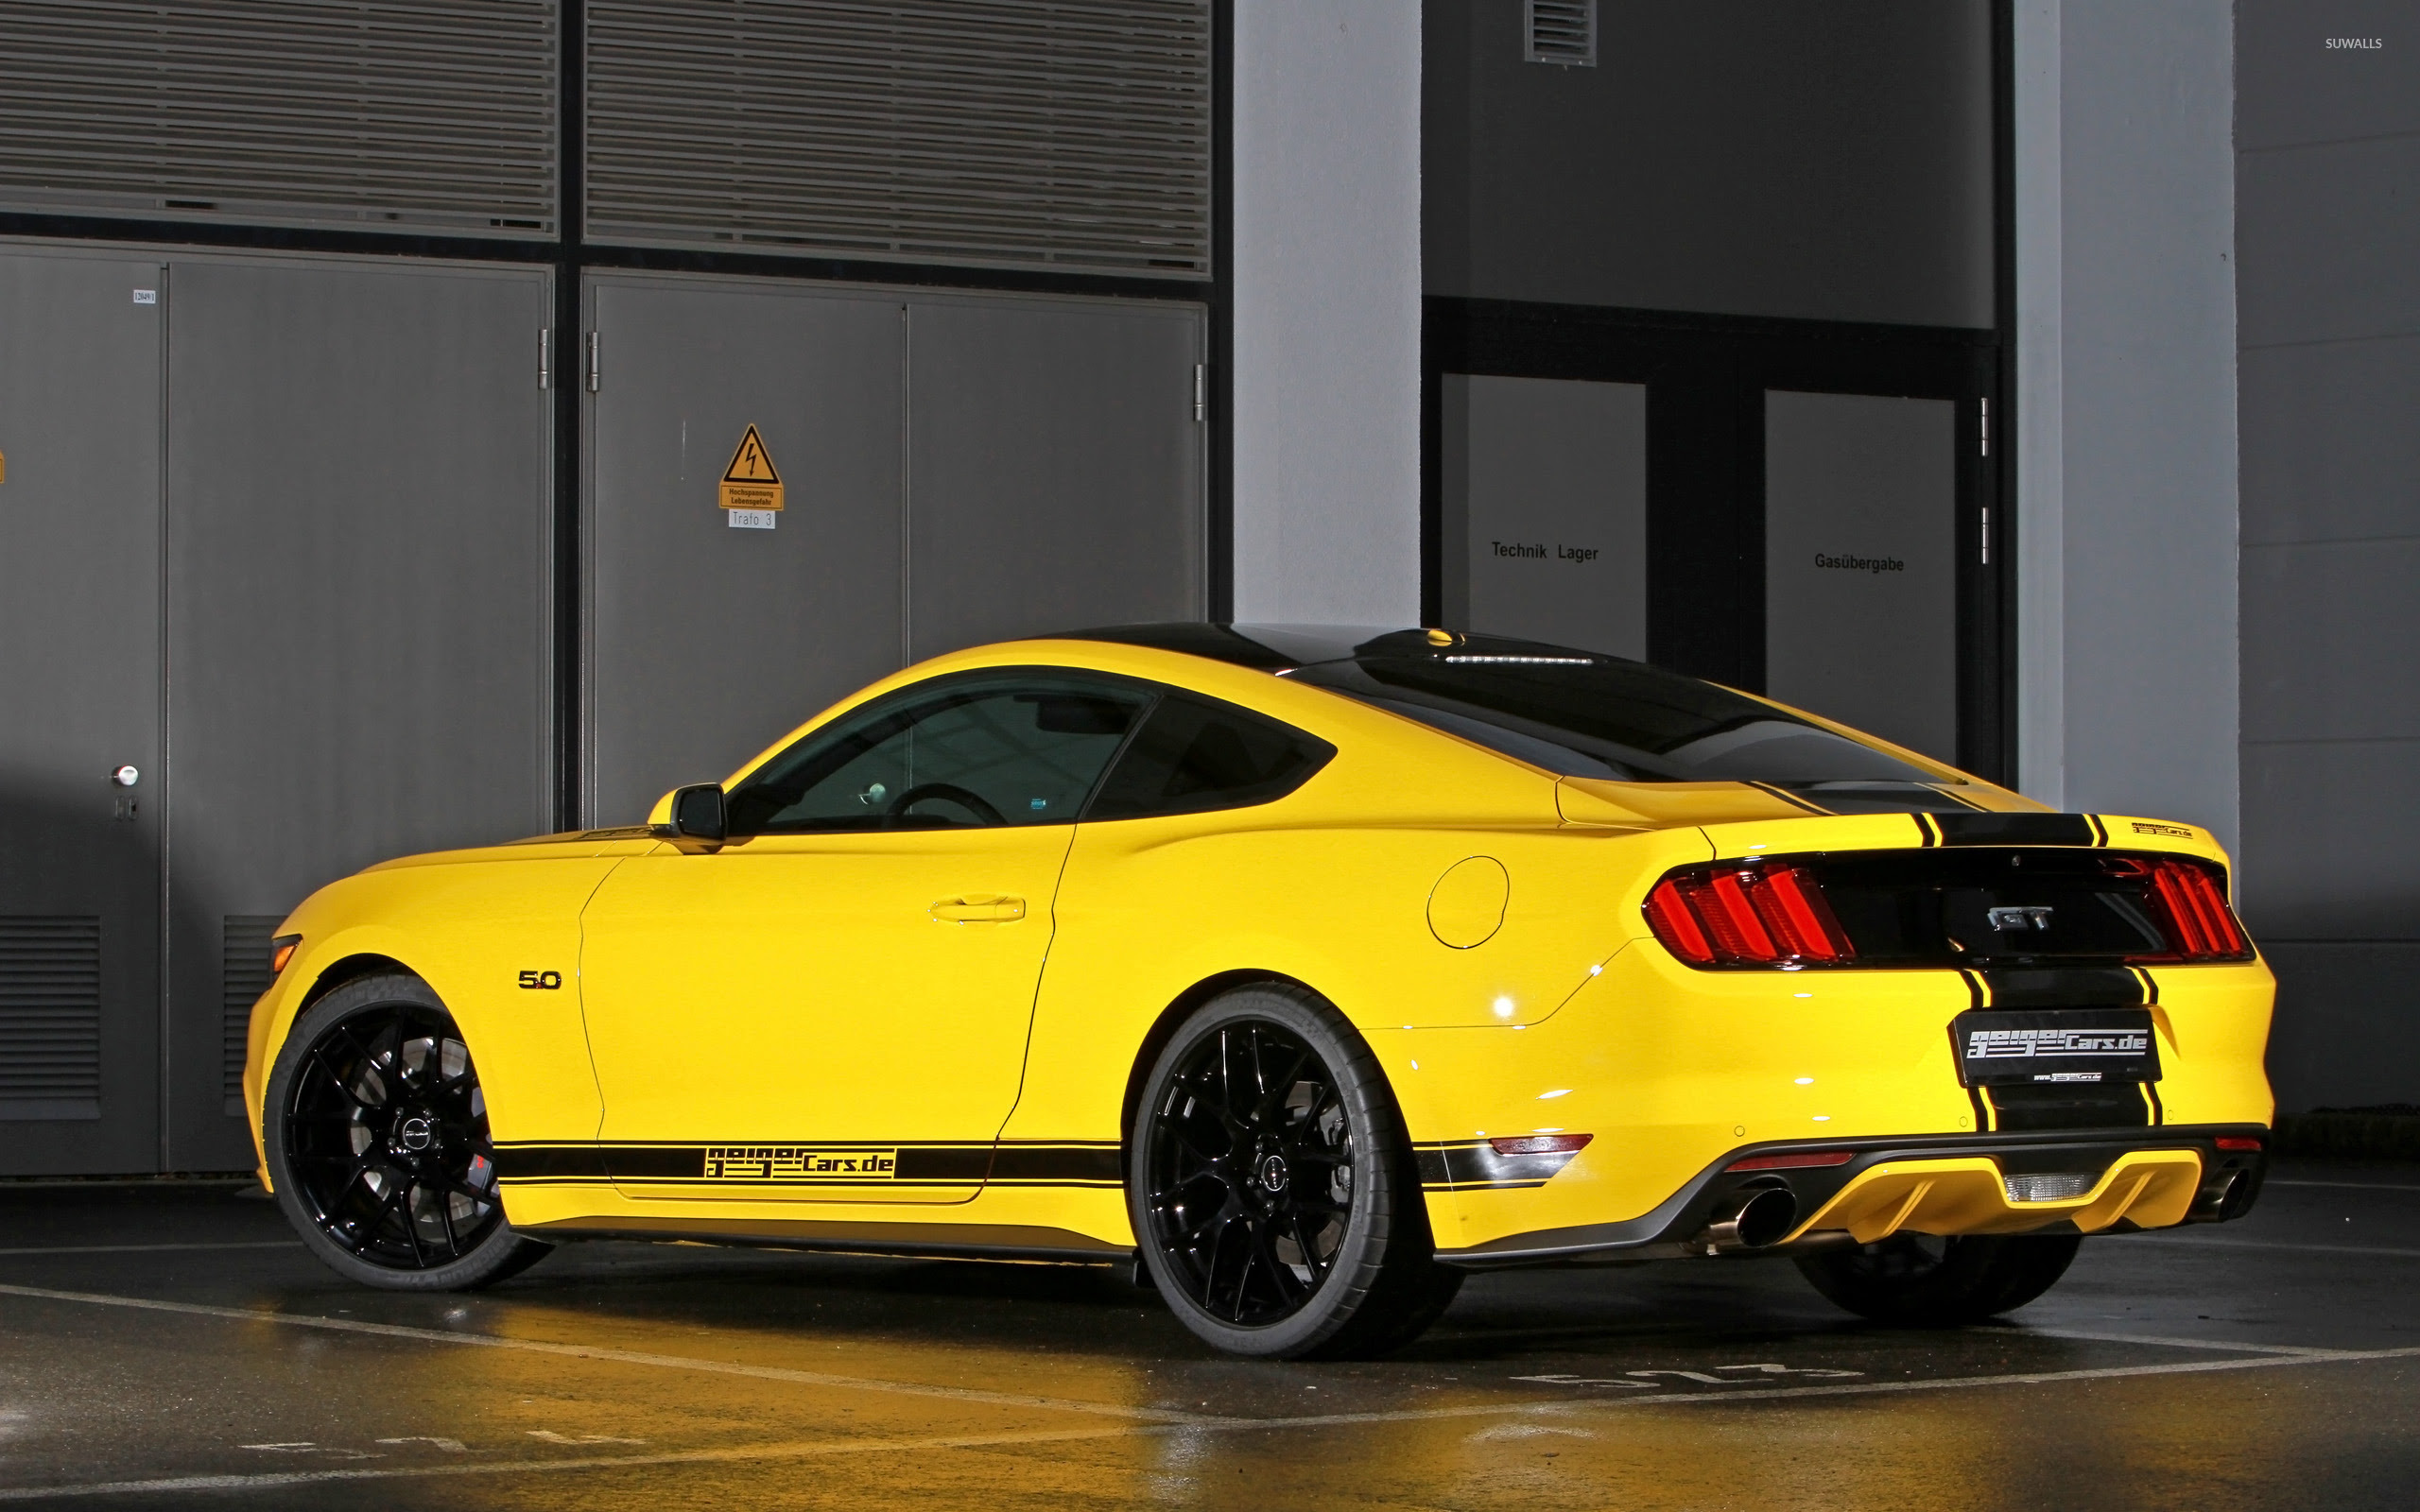 2015 Yellow GeigerCars Ford Mustang GT side view [2] wallpaper Car